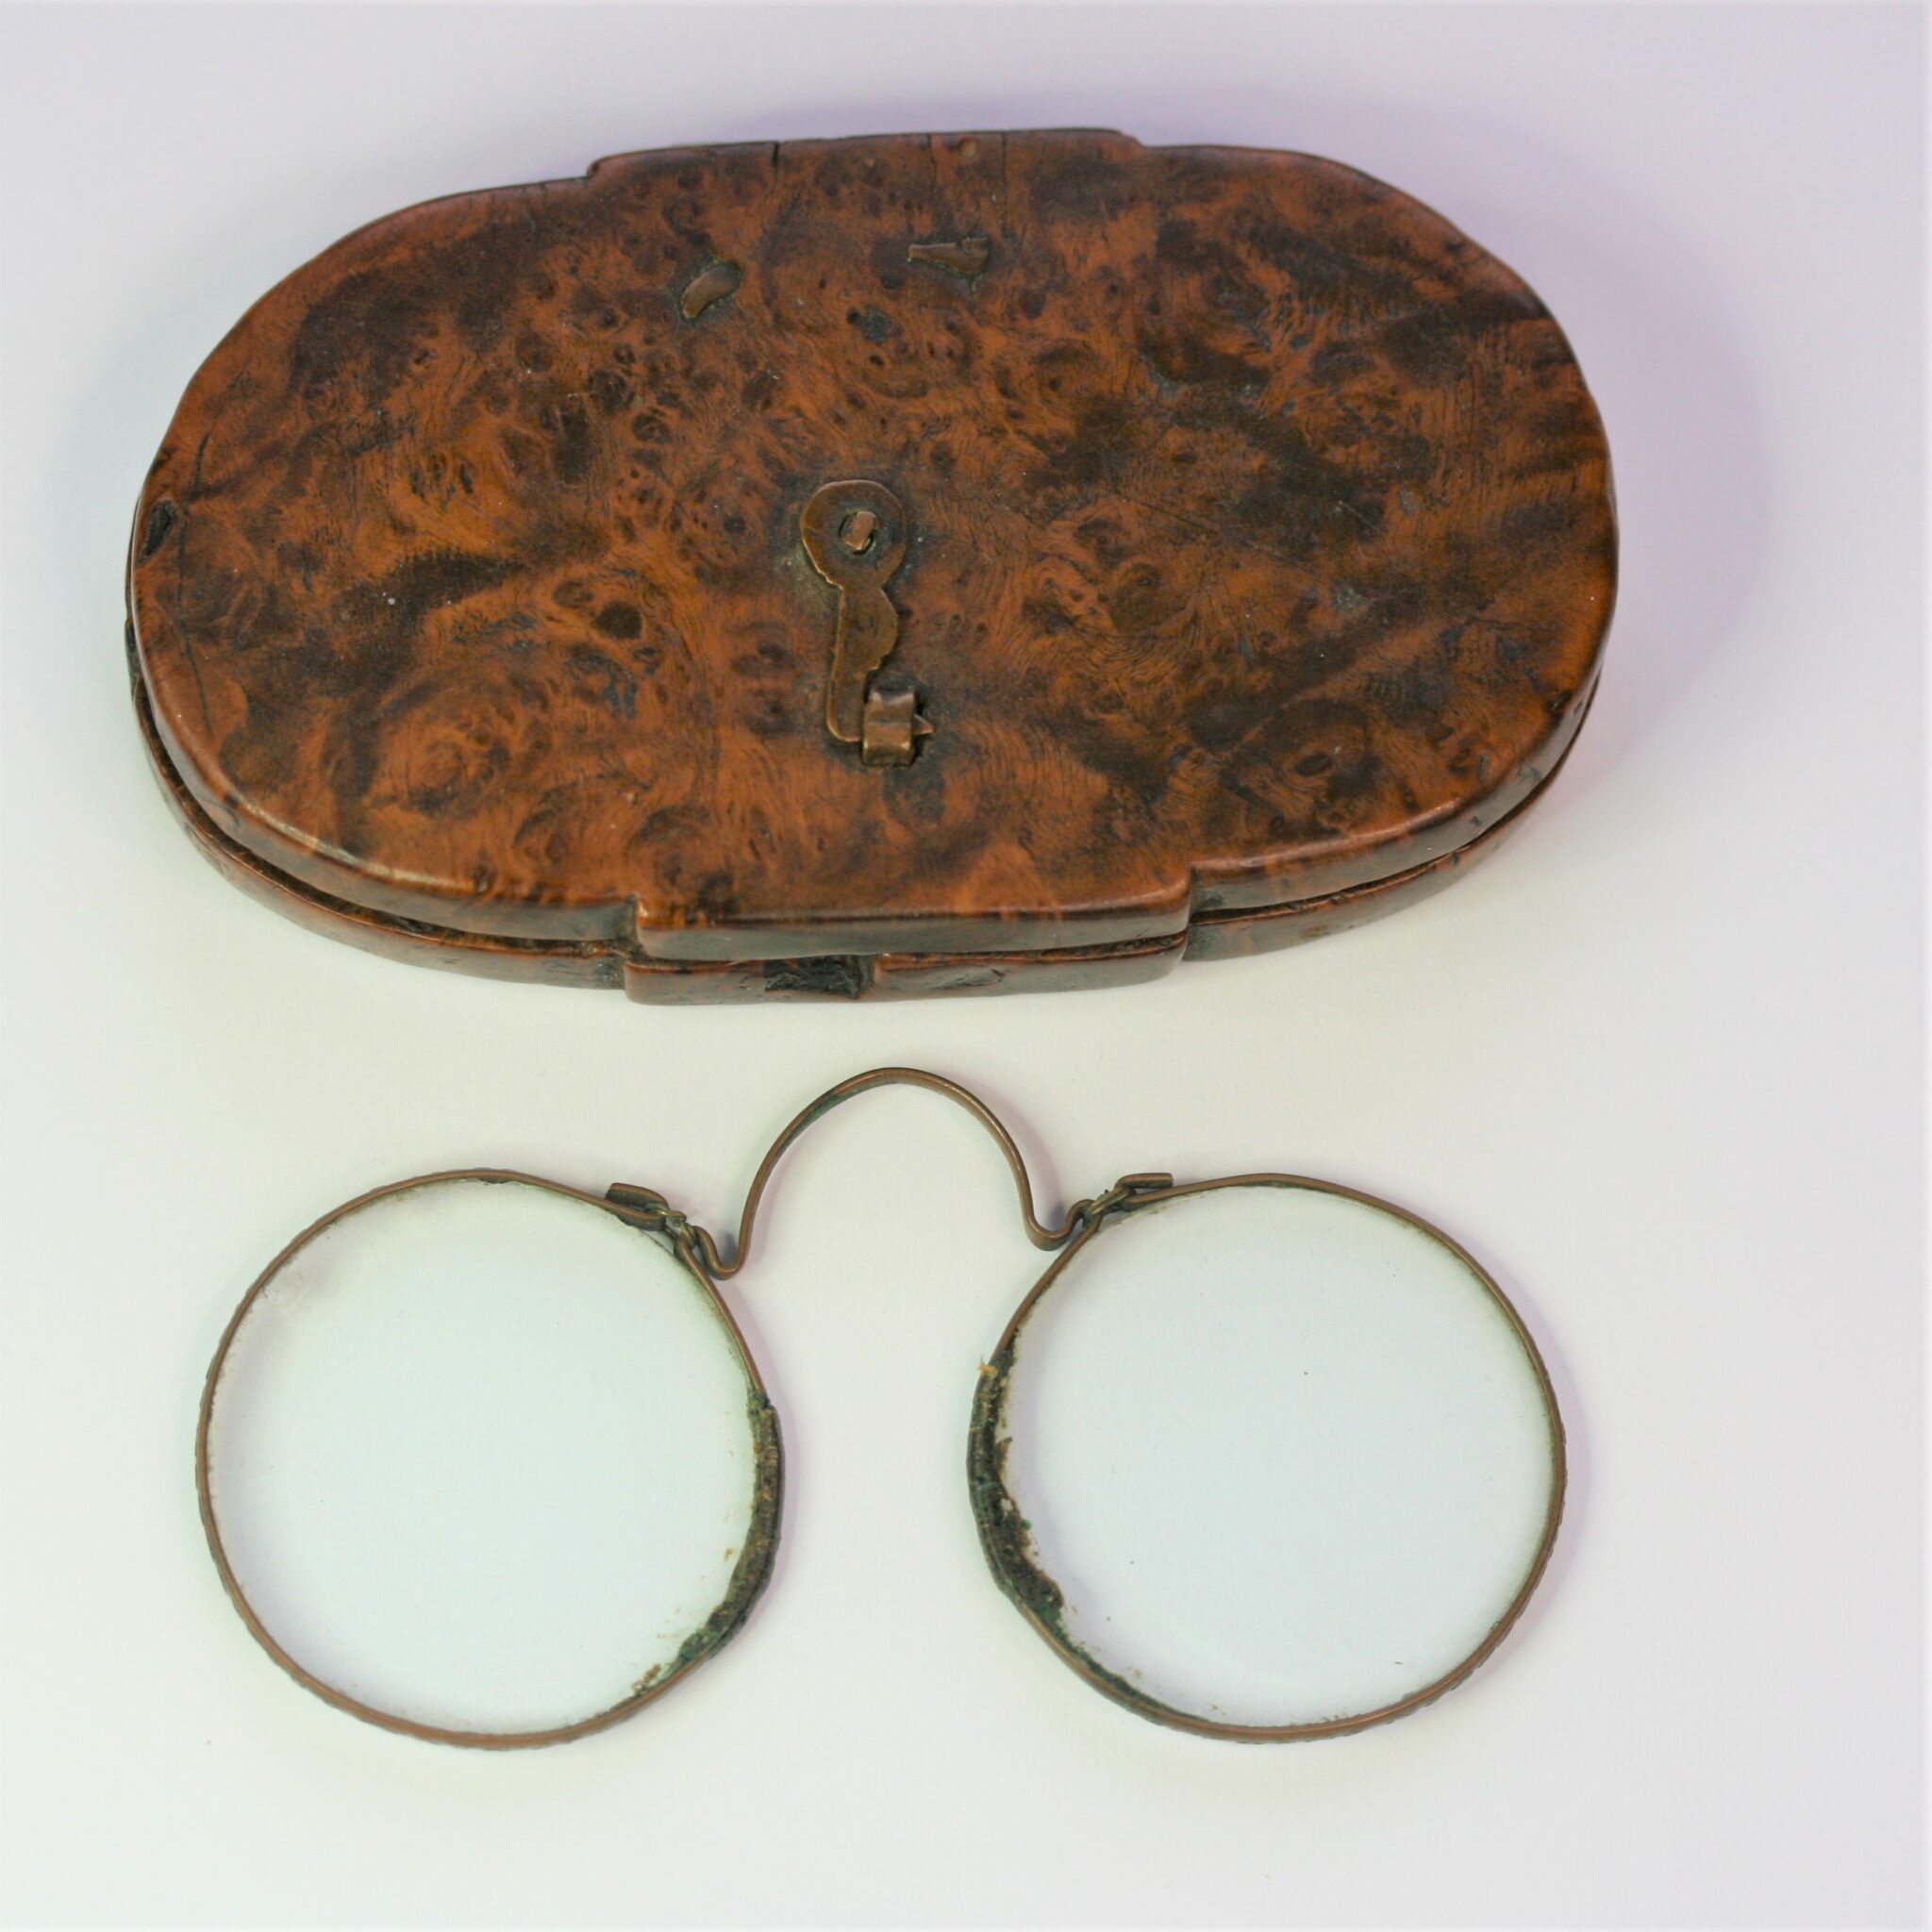 ANTIQUE DATED 1740 NUREMBERG SPECTACLES WITH CASE, EMBOSSED CLEARLY AROUND RIM   FOR SALE